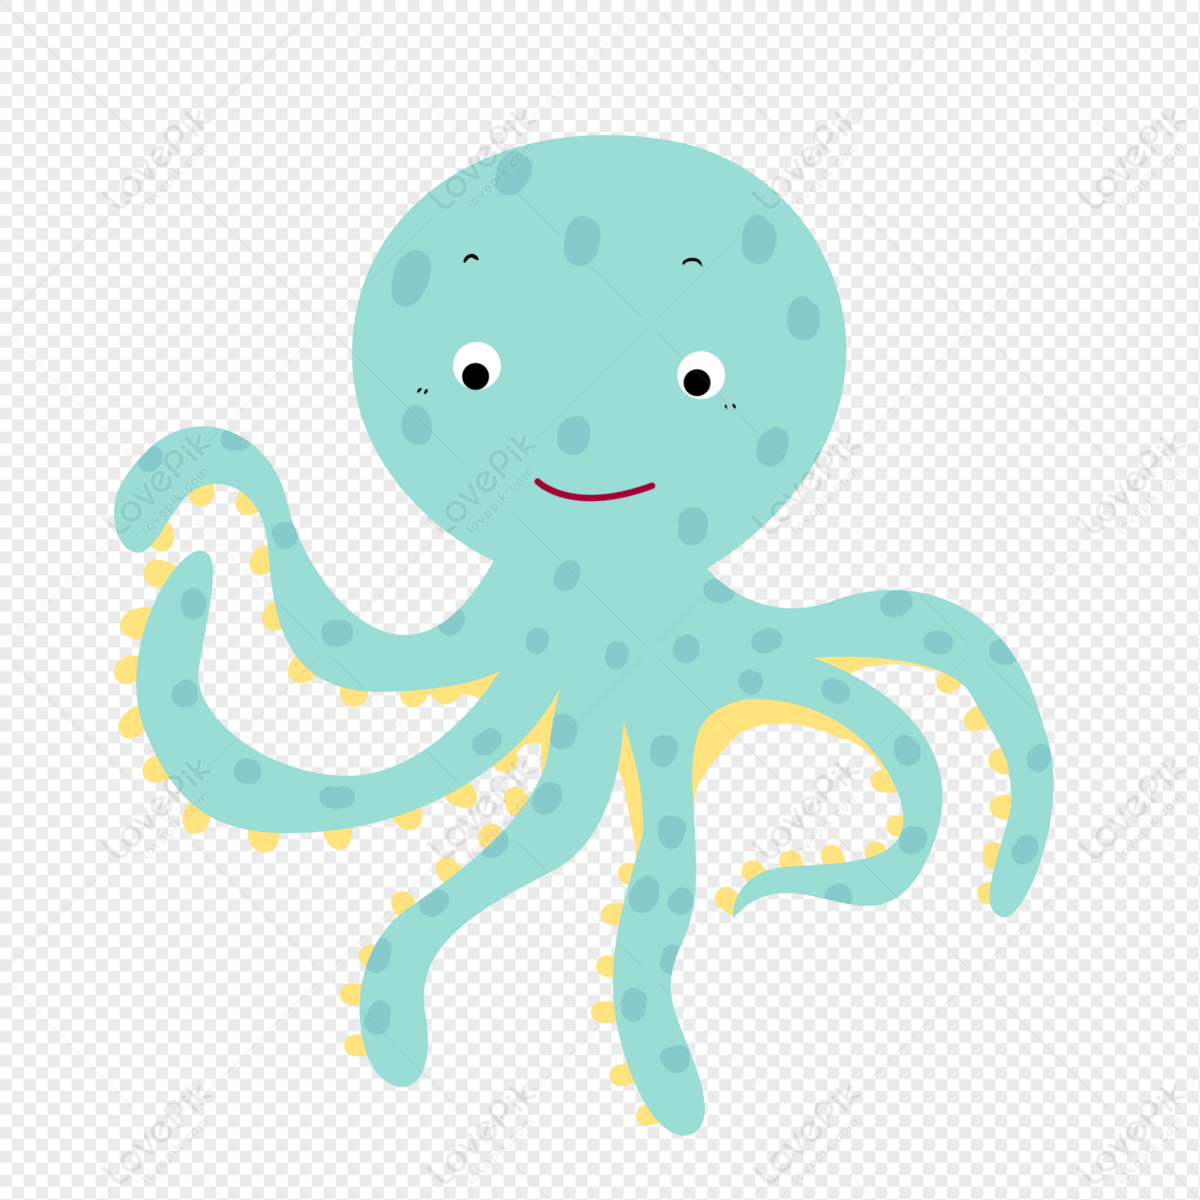 Octopus PNG Free Download And Clipart Image For Free Download - Lovepik |  401424823